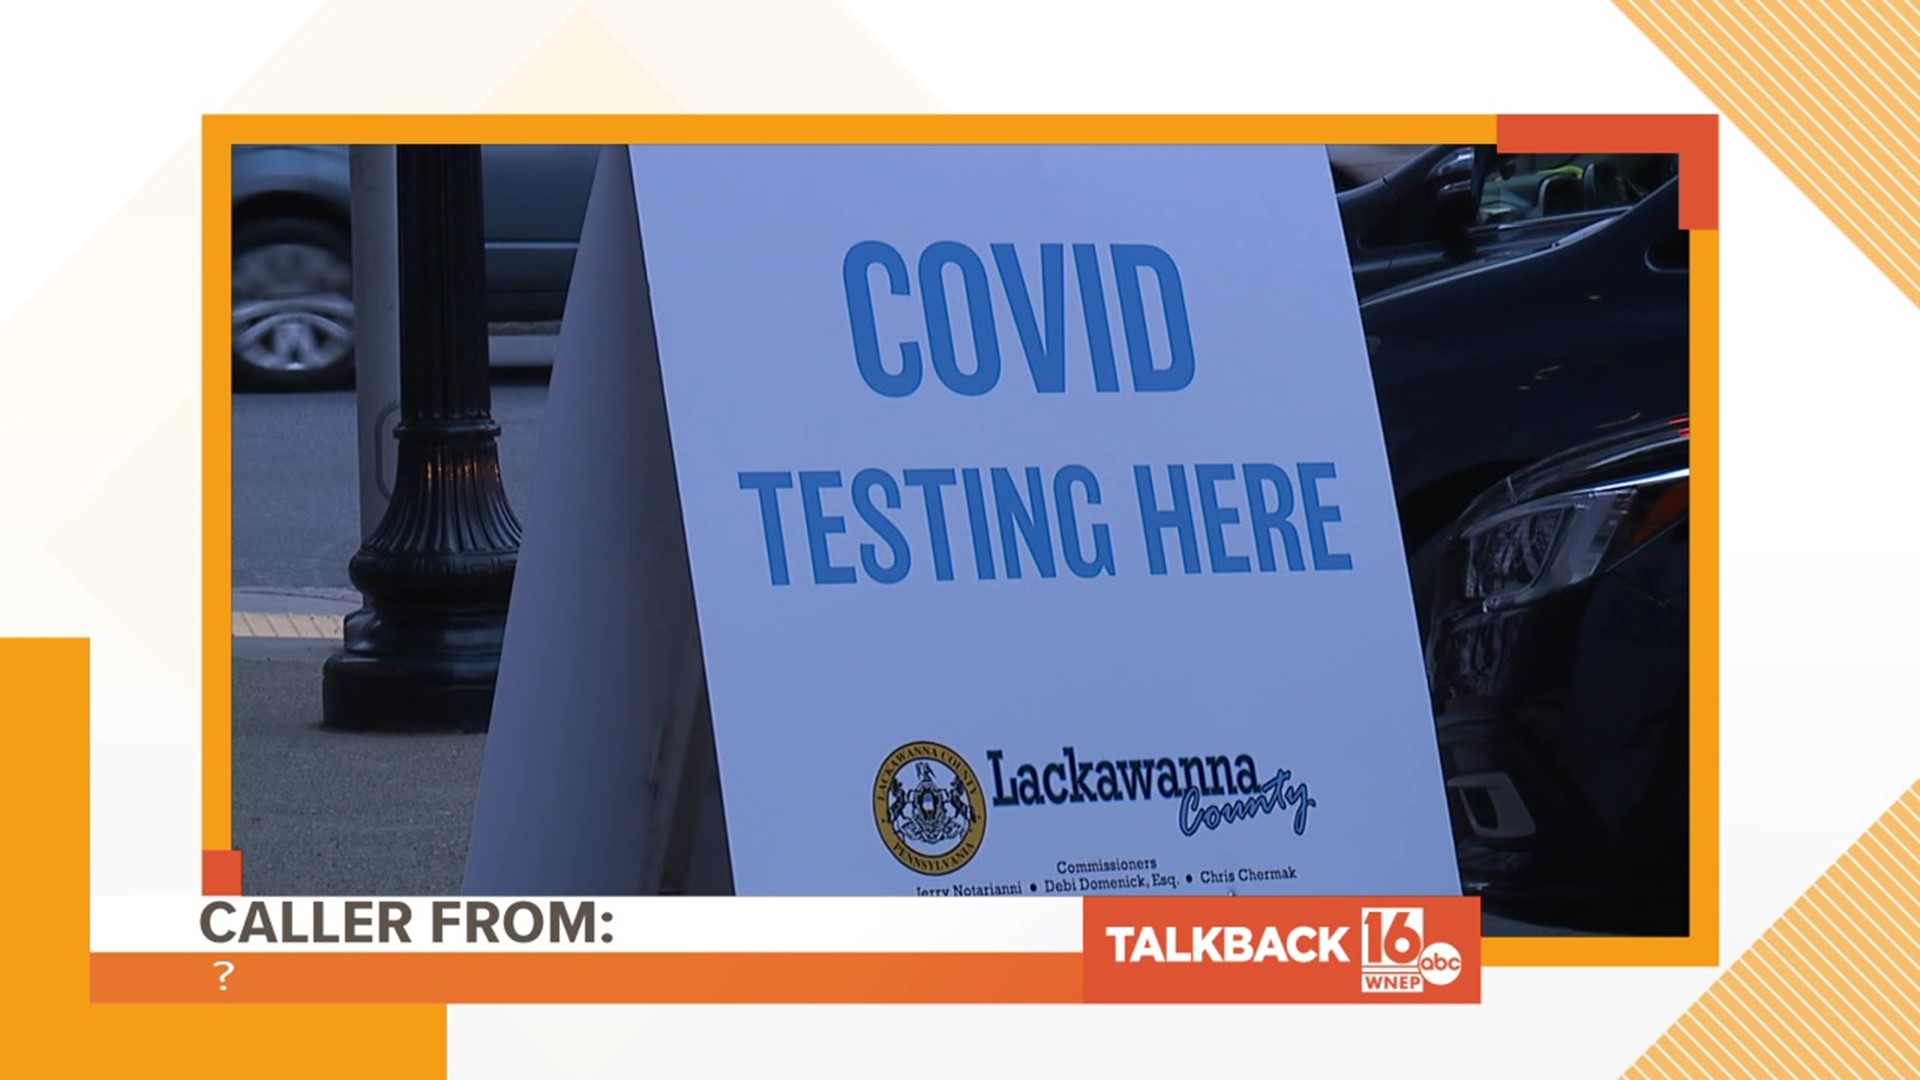 In this Talkback 16, callers discuss COVID testing sites.